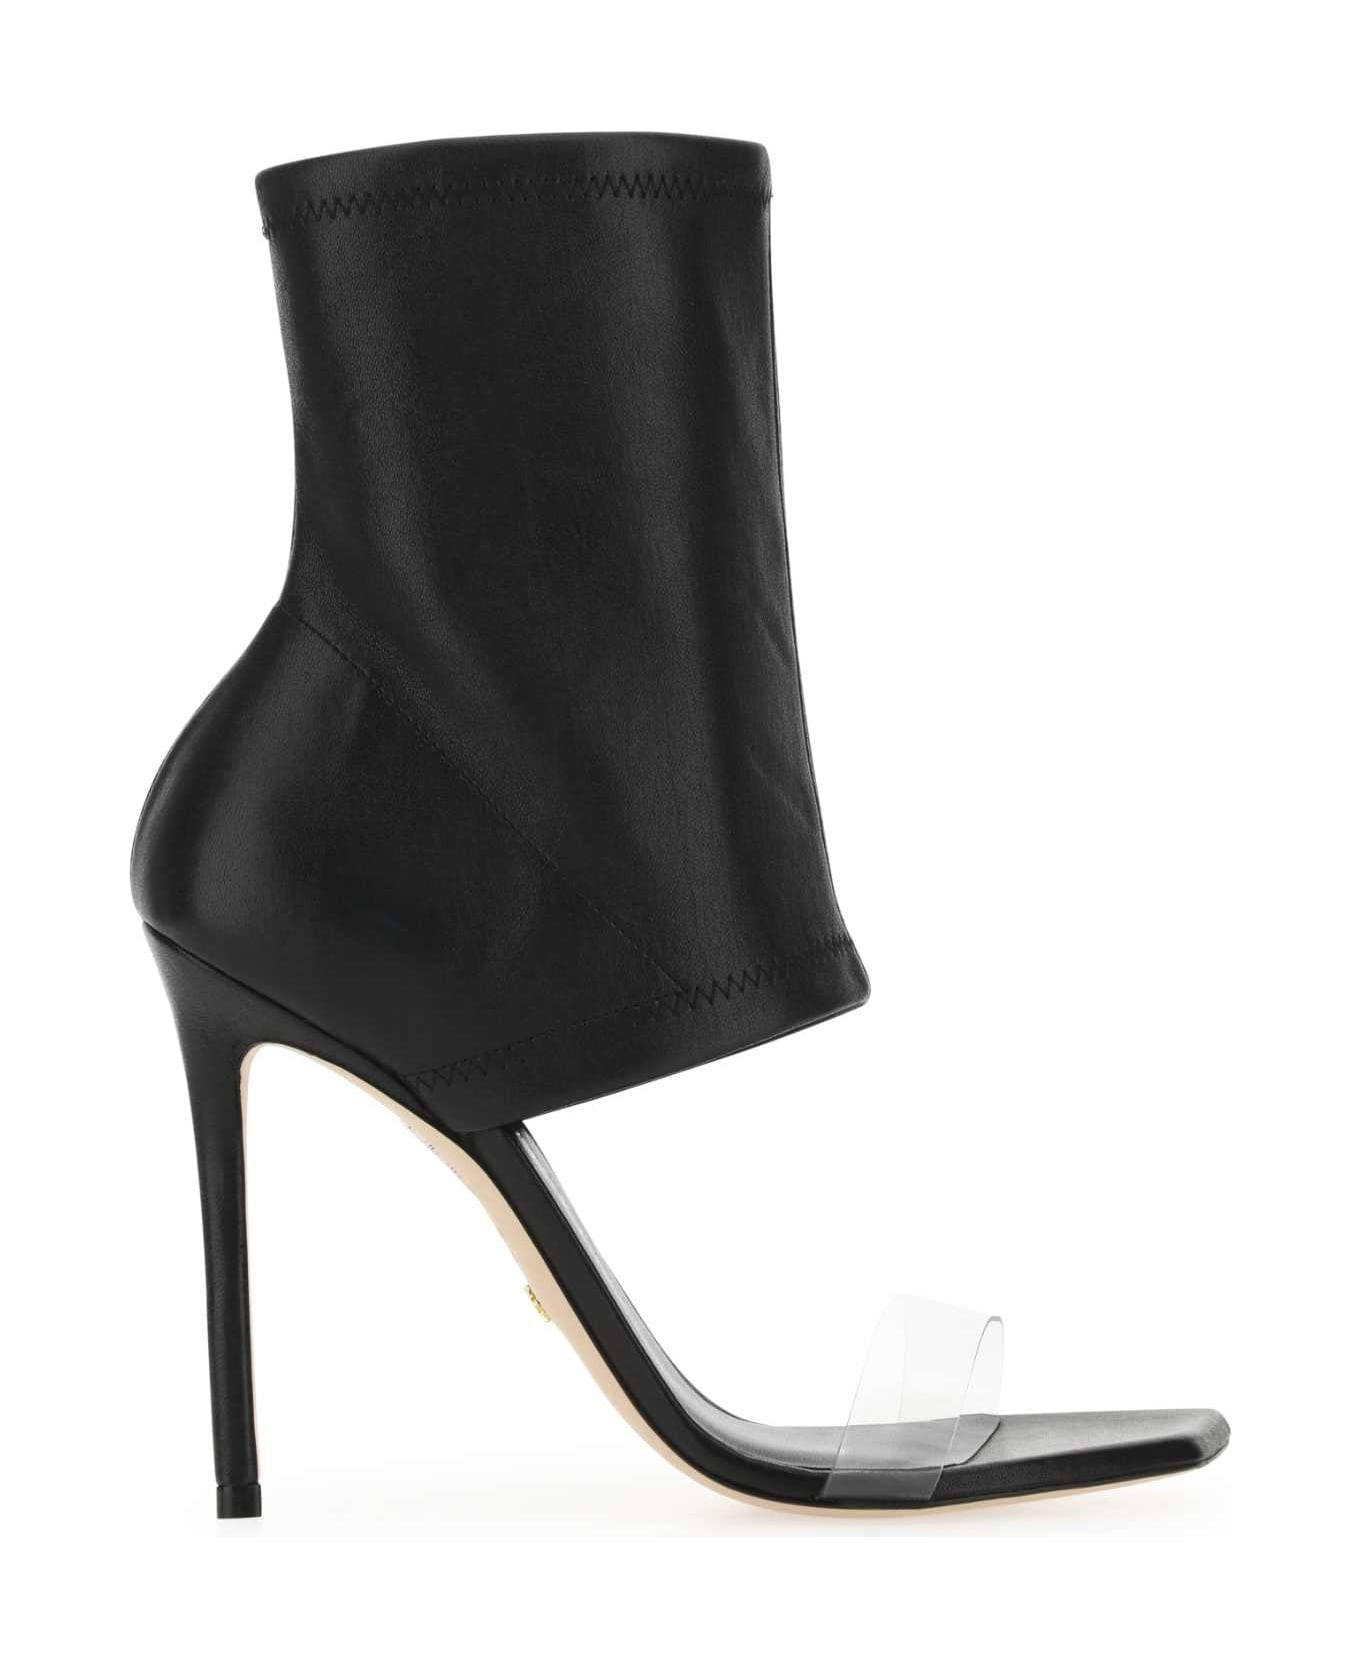 Stuart Weitzman Black Nappa Leather Frontrow Ankle Boots - BLACKCLEAR